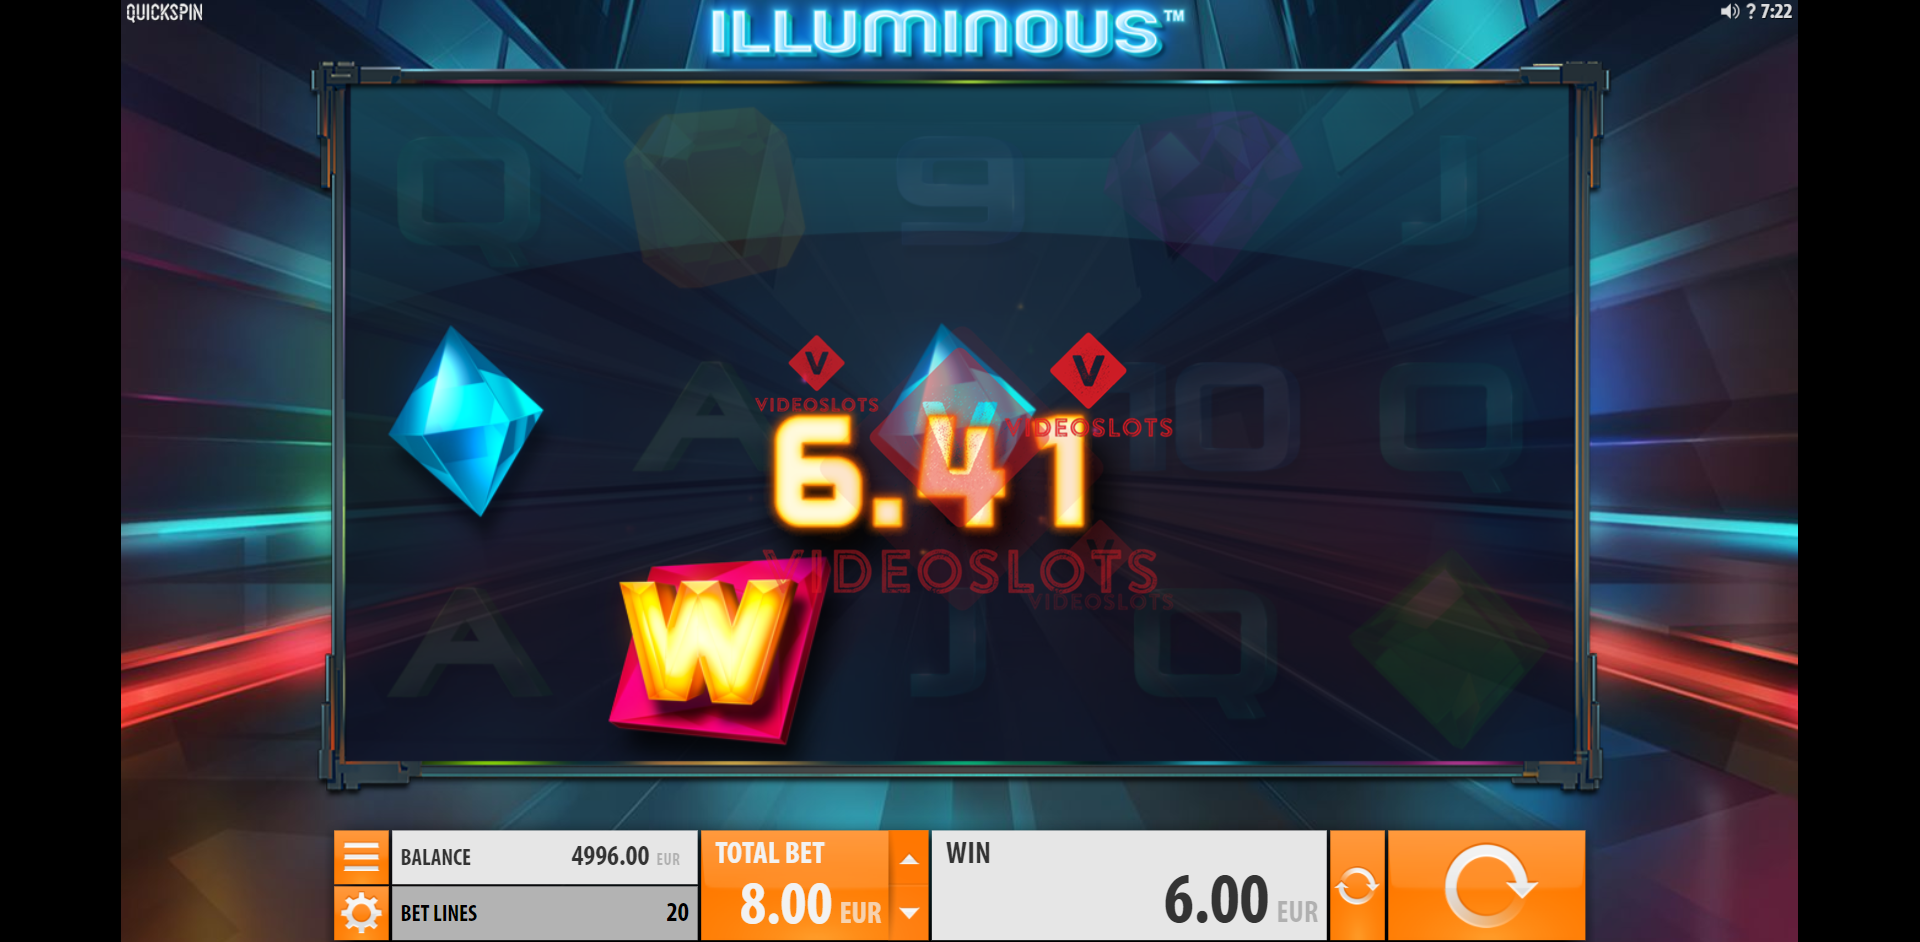 Base Game for Illuminous slot from Quickspin